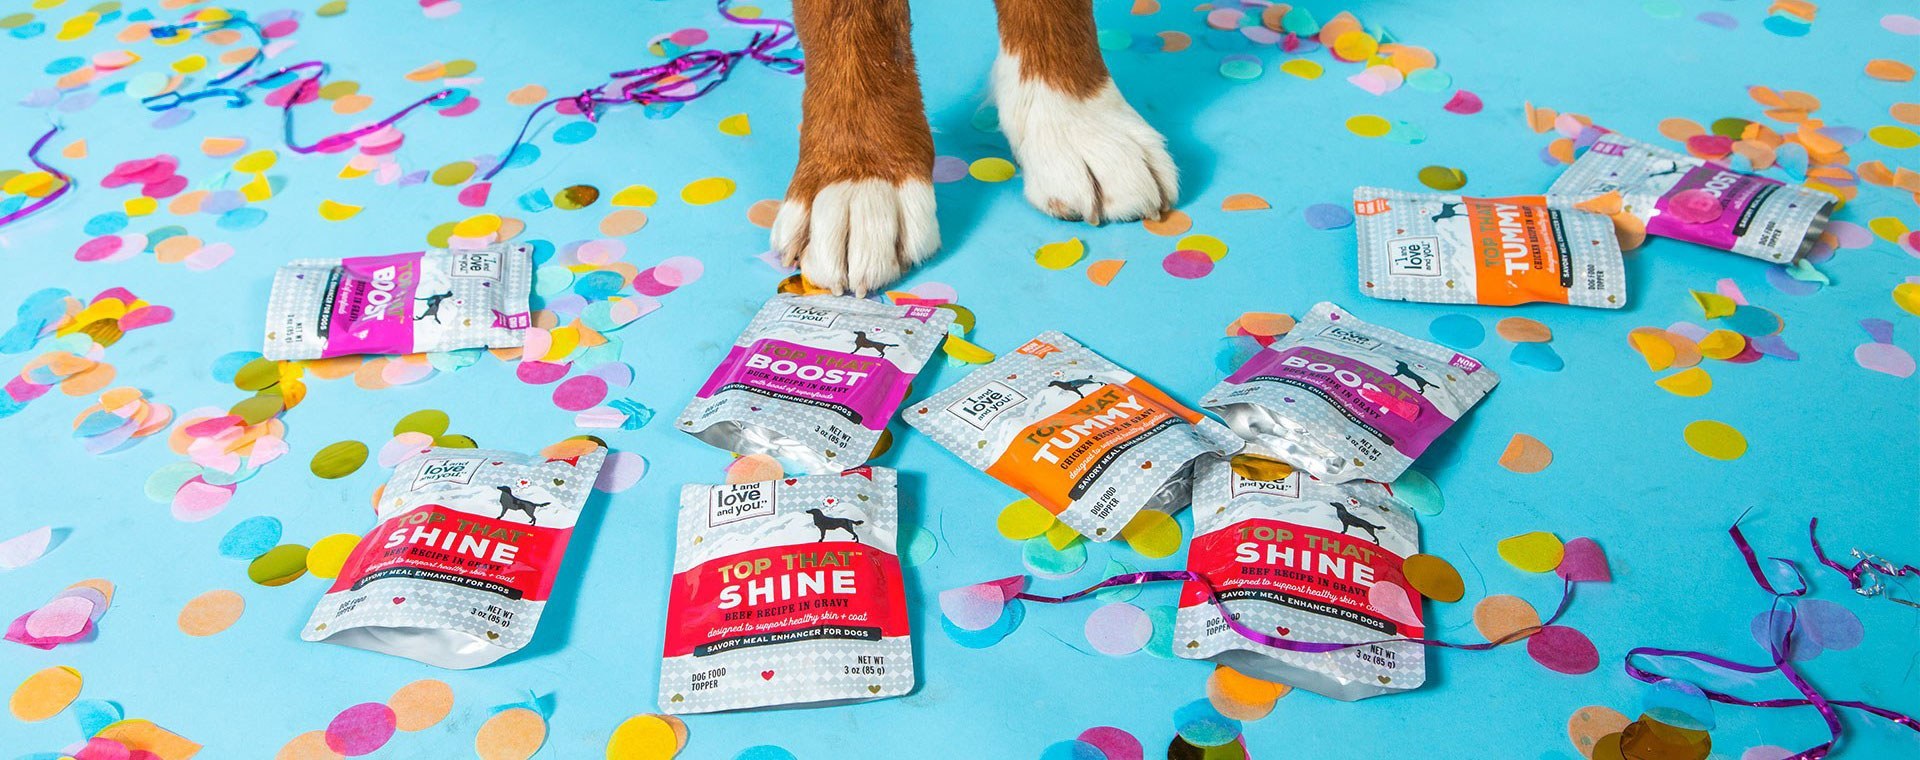 How to Throw a Good Birthday Party for Your Dog or Cat